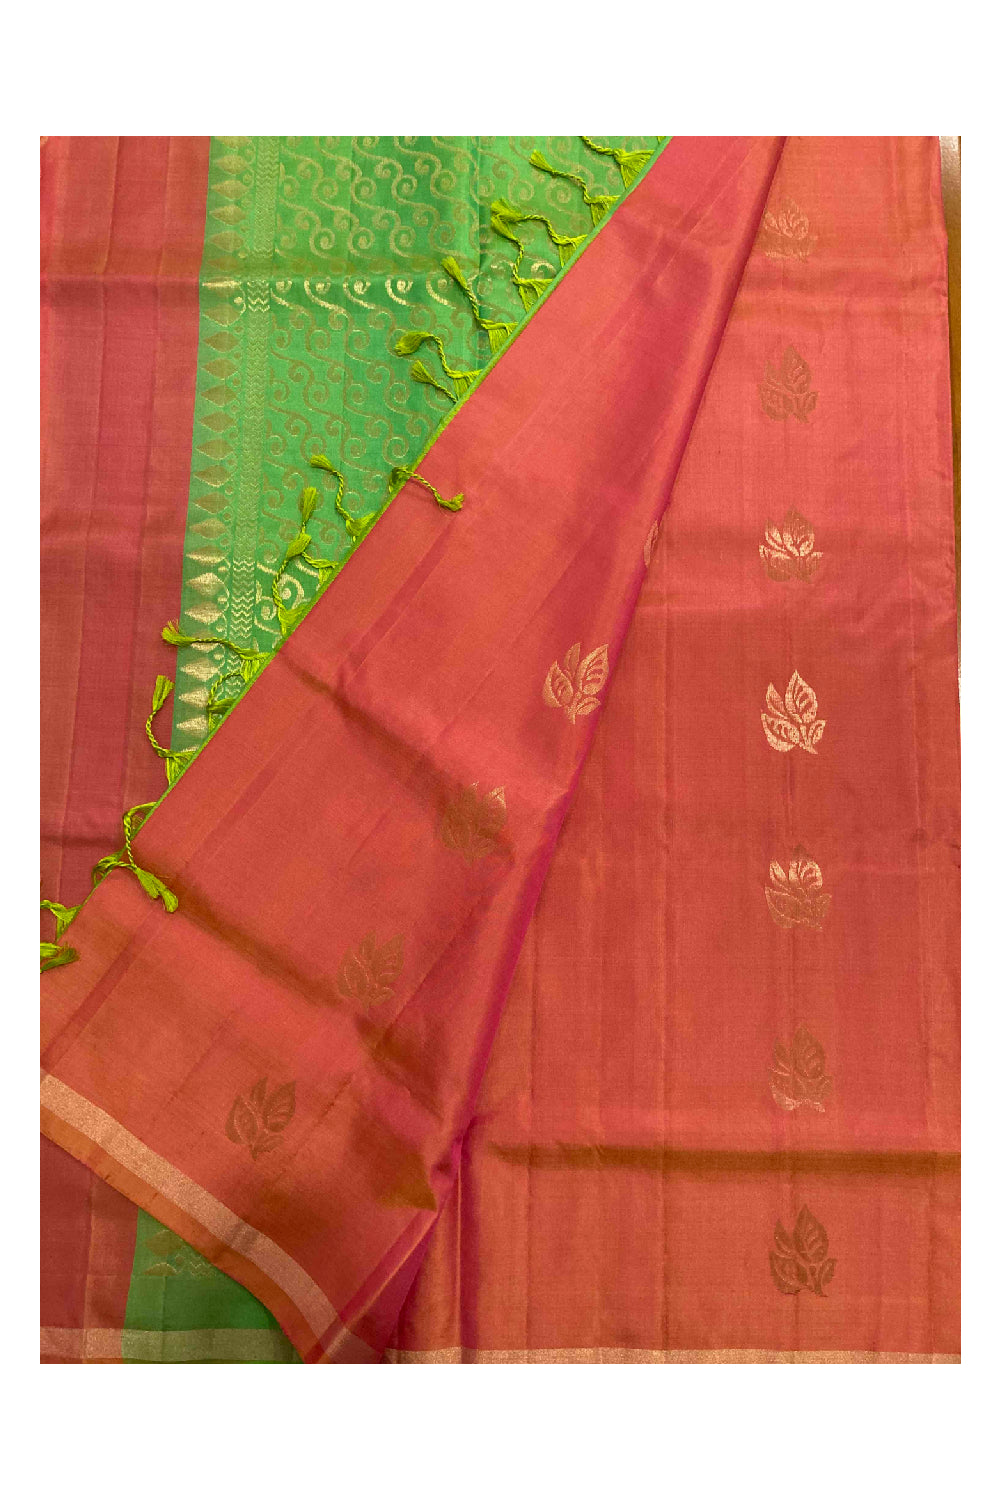 Southloom Handloom Pure Silk Kanchipuram Saree in Red and Green Floral Motifs